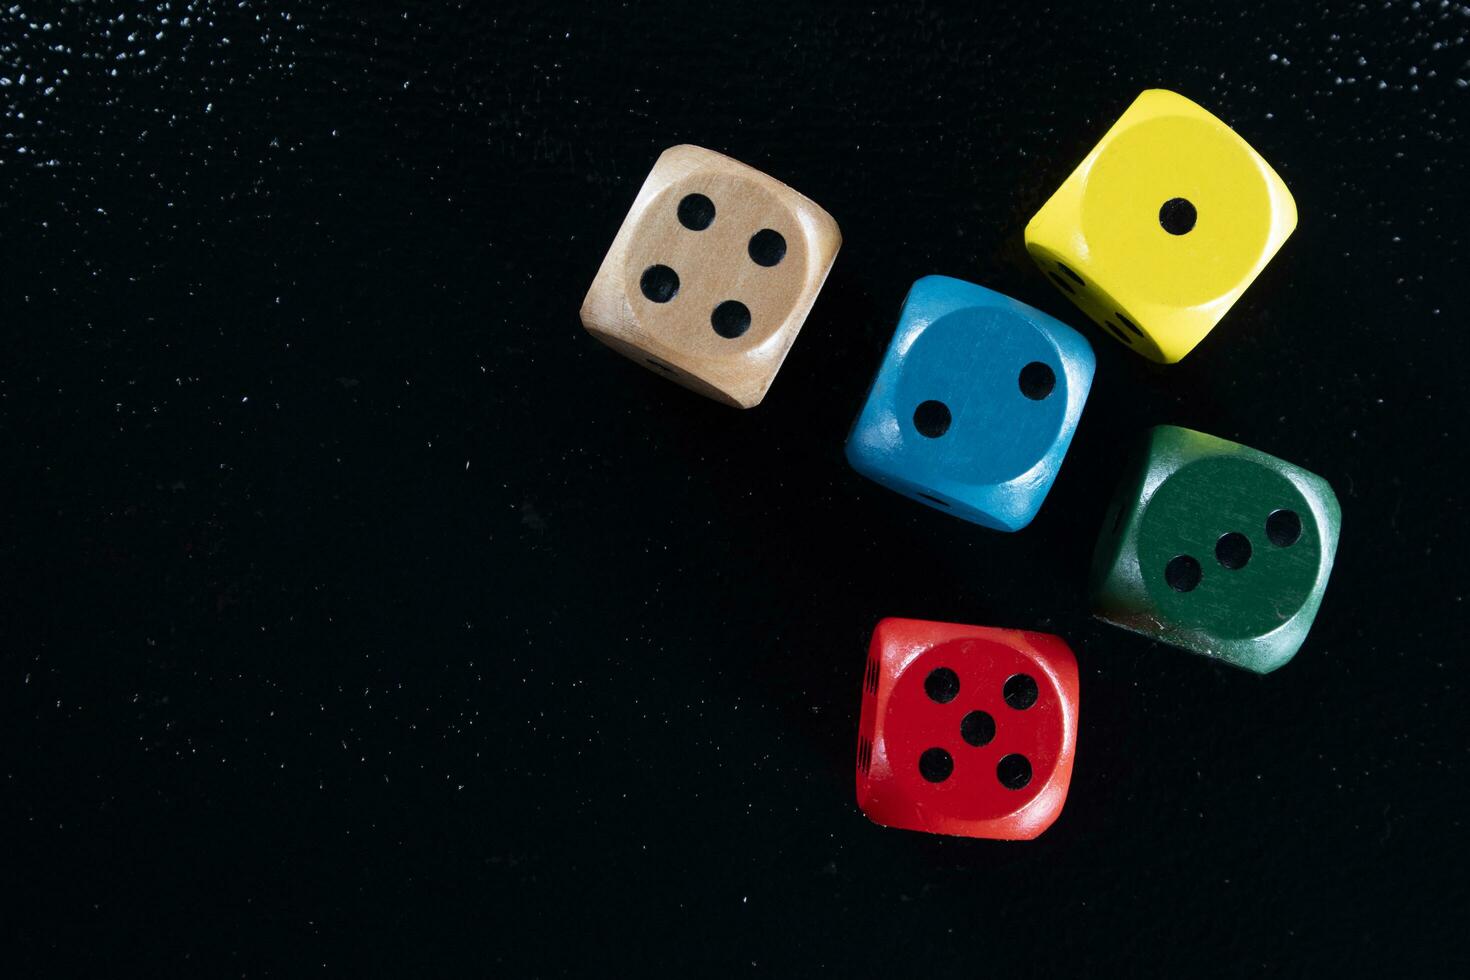 Set of colored playing dice photo